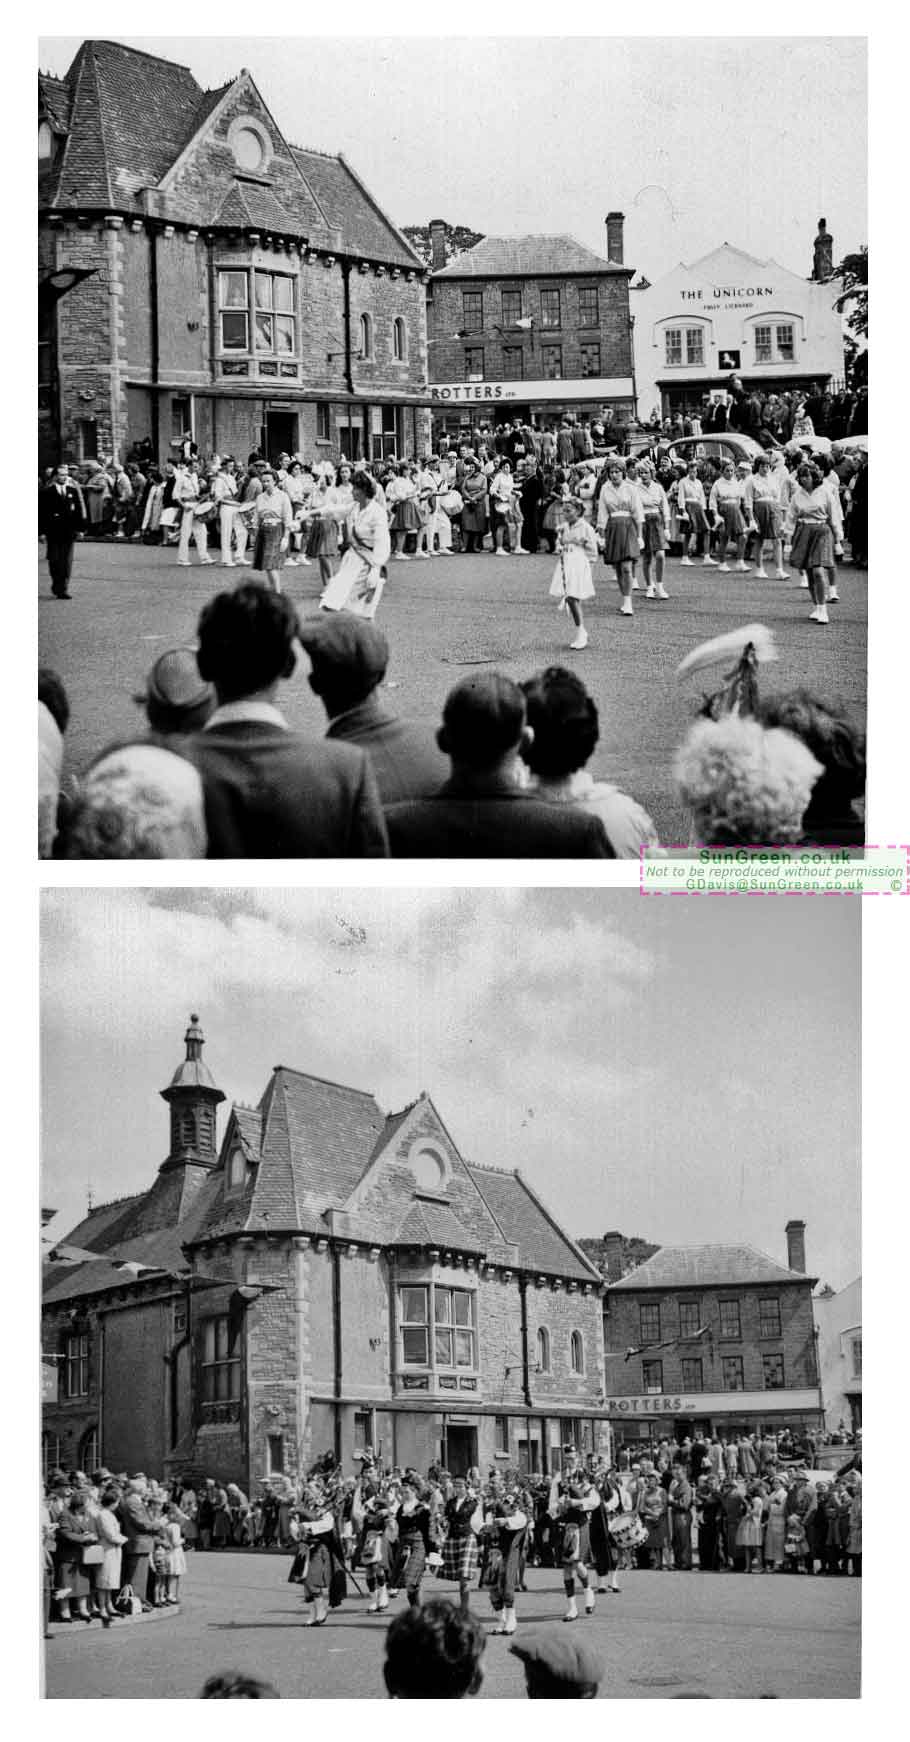 Two photos taken at Coleford Carnival in 1961